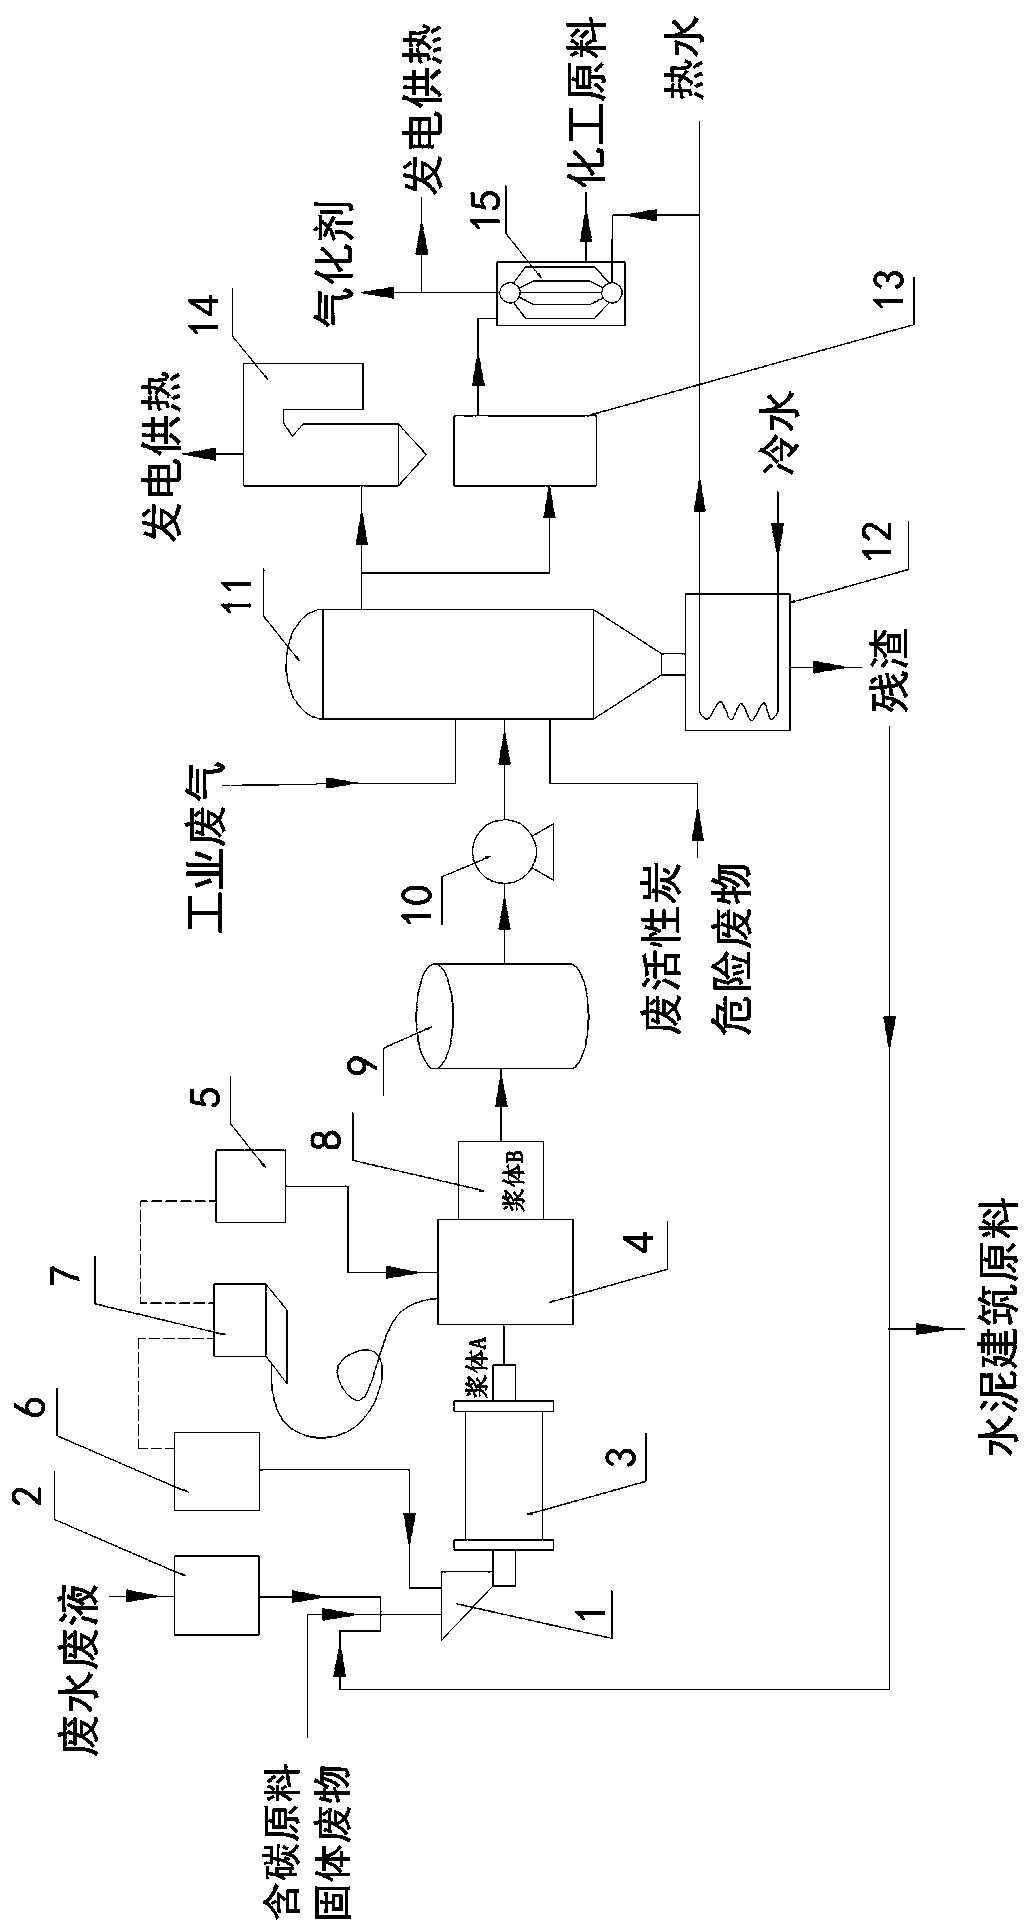 Gas-liquid-solid waste comprehensive treatment and resource utilization system